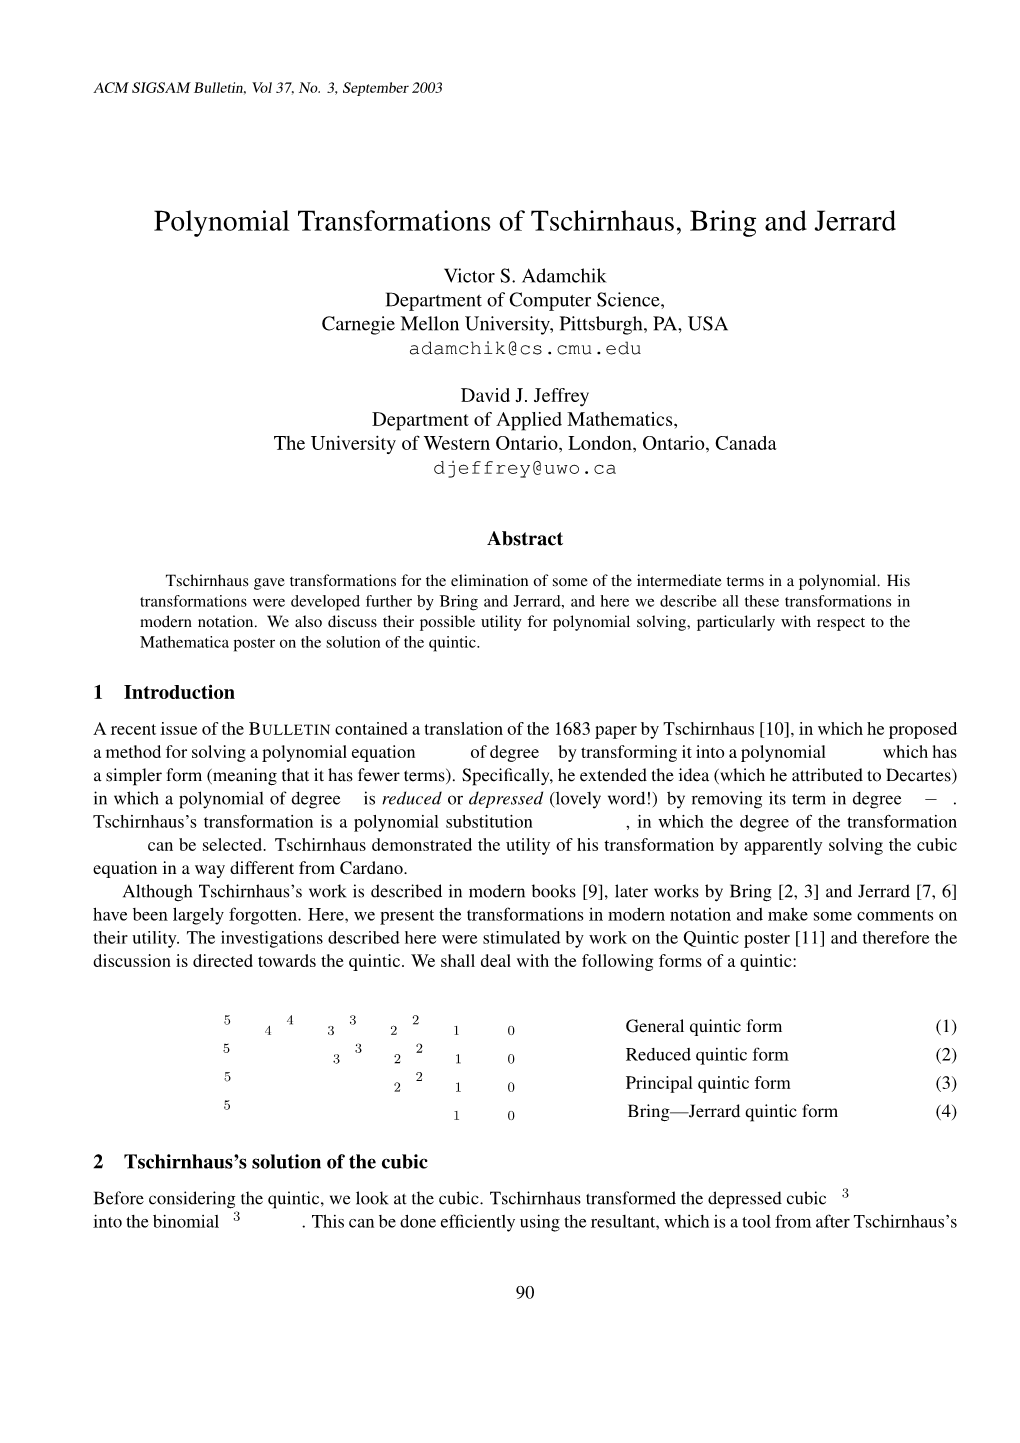 Polynomial Transformations of Tschirnhaus, Bring and Jerrard